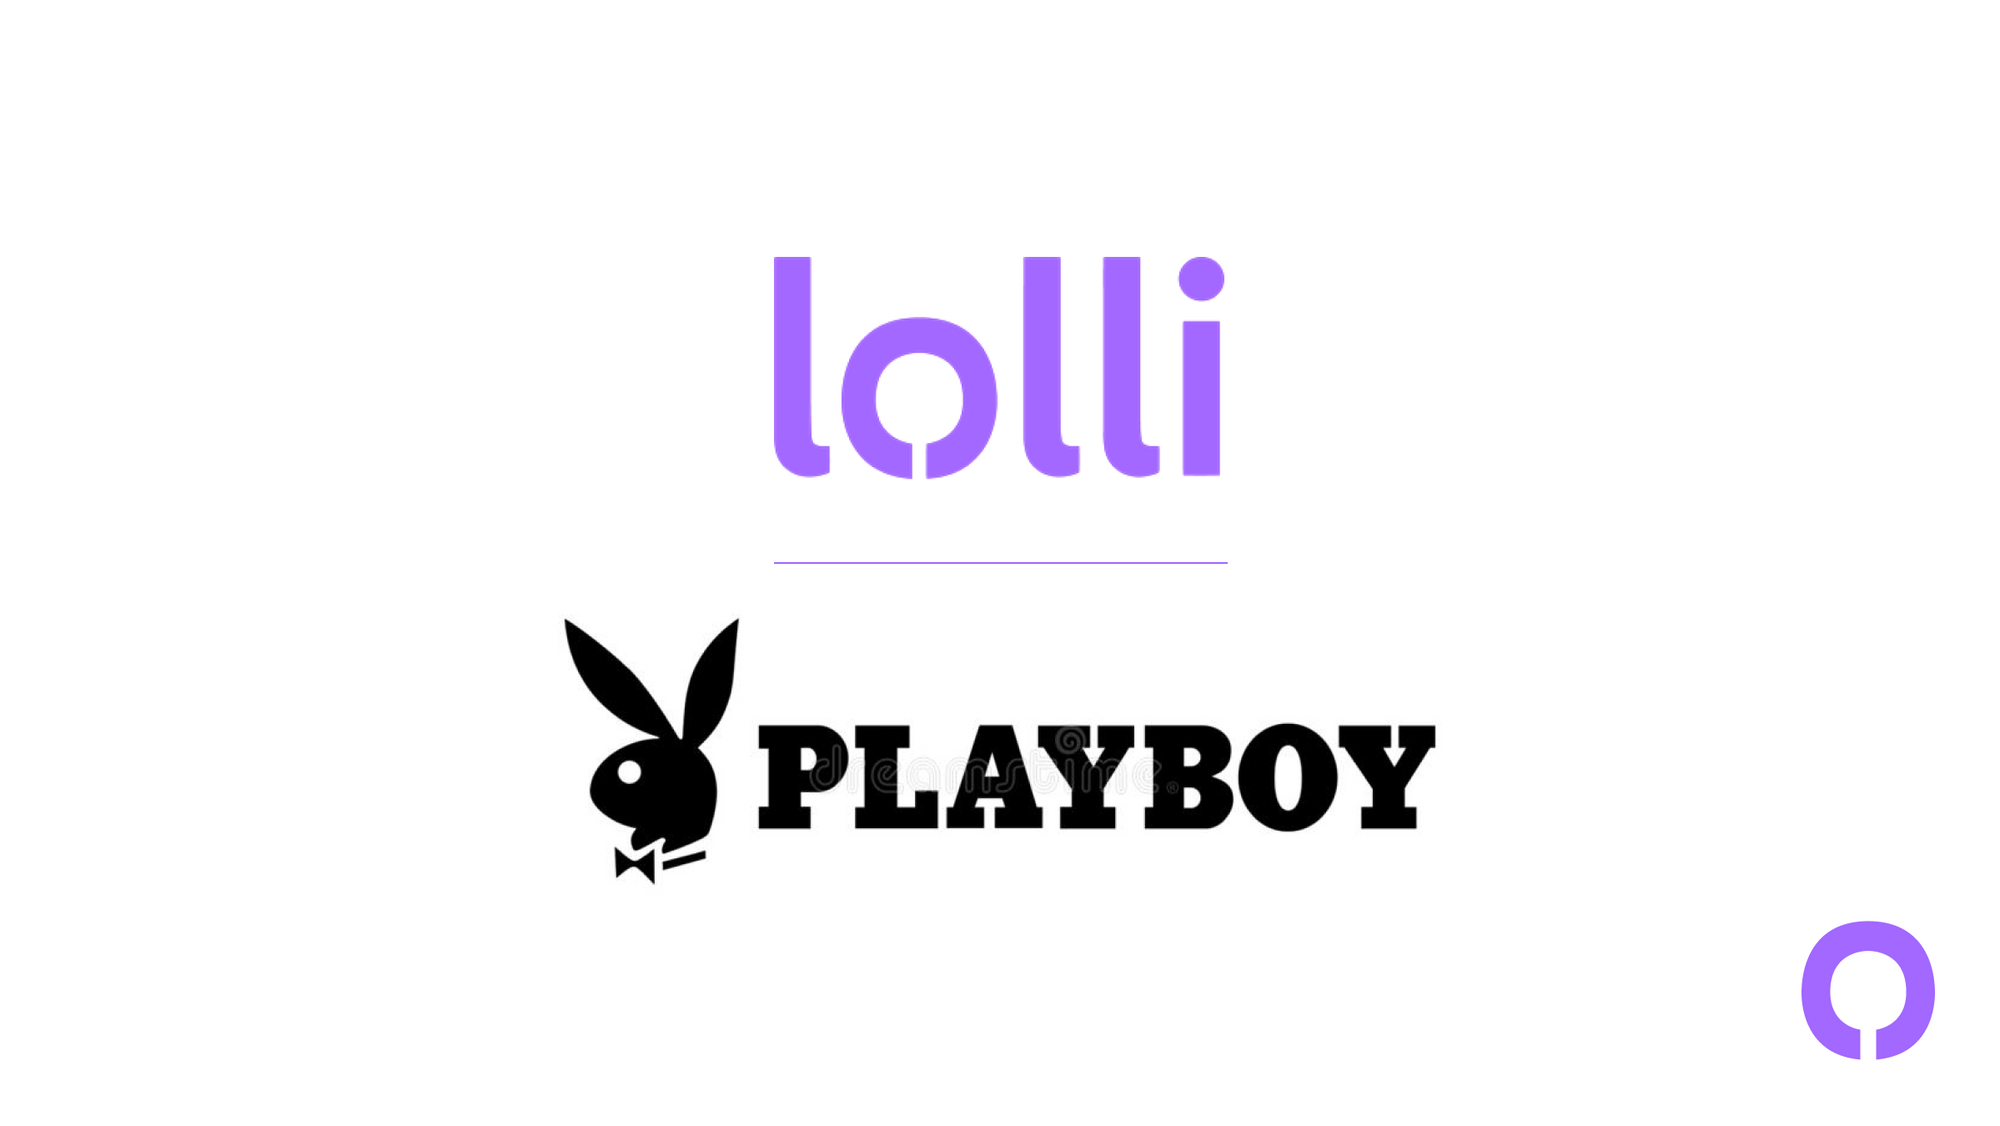 Playboy is Now on Lolli!